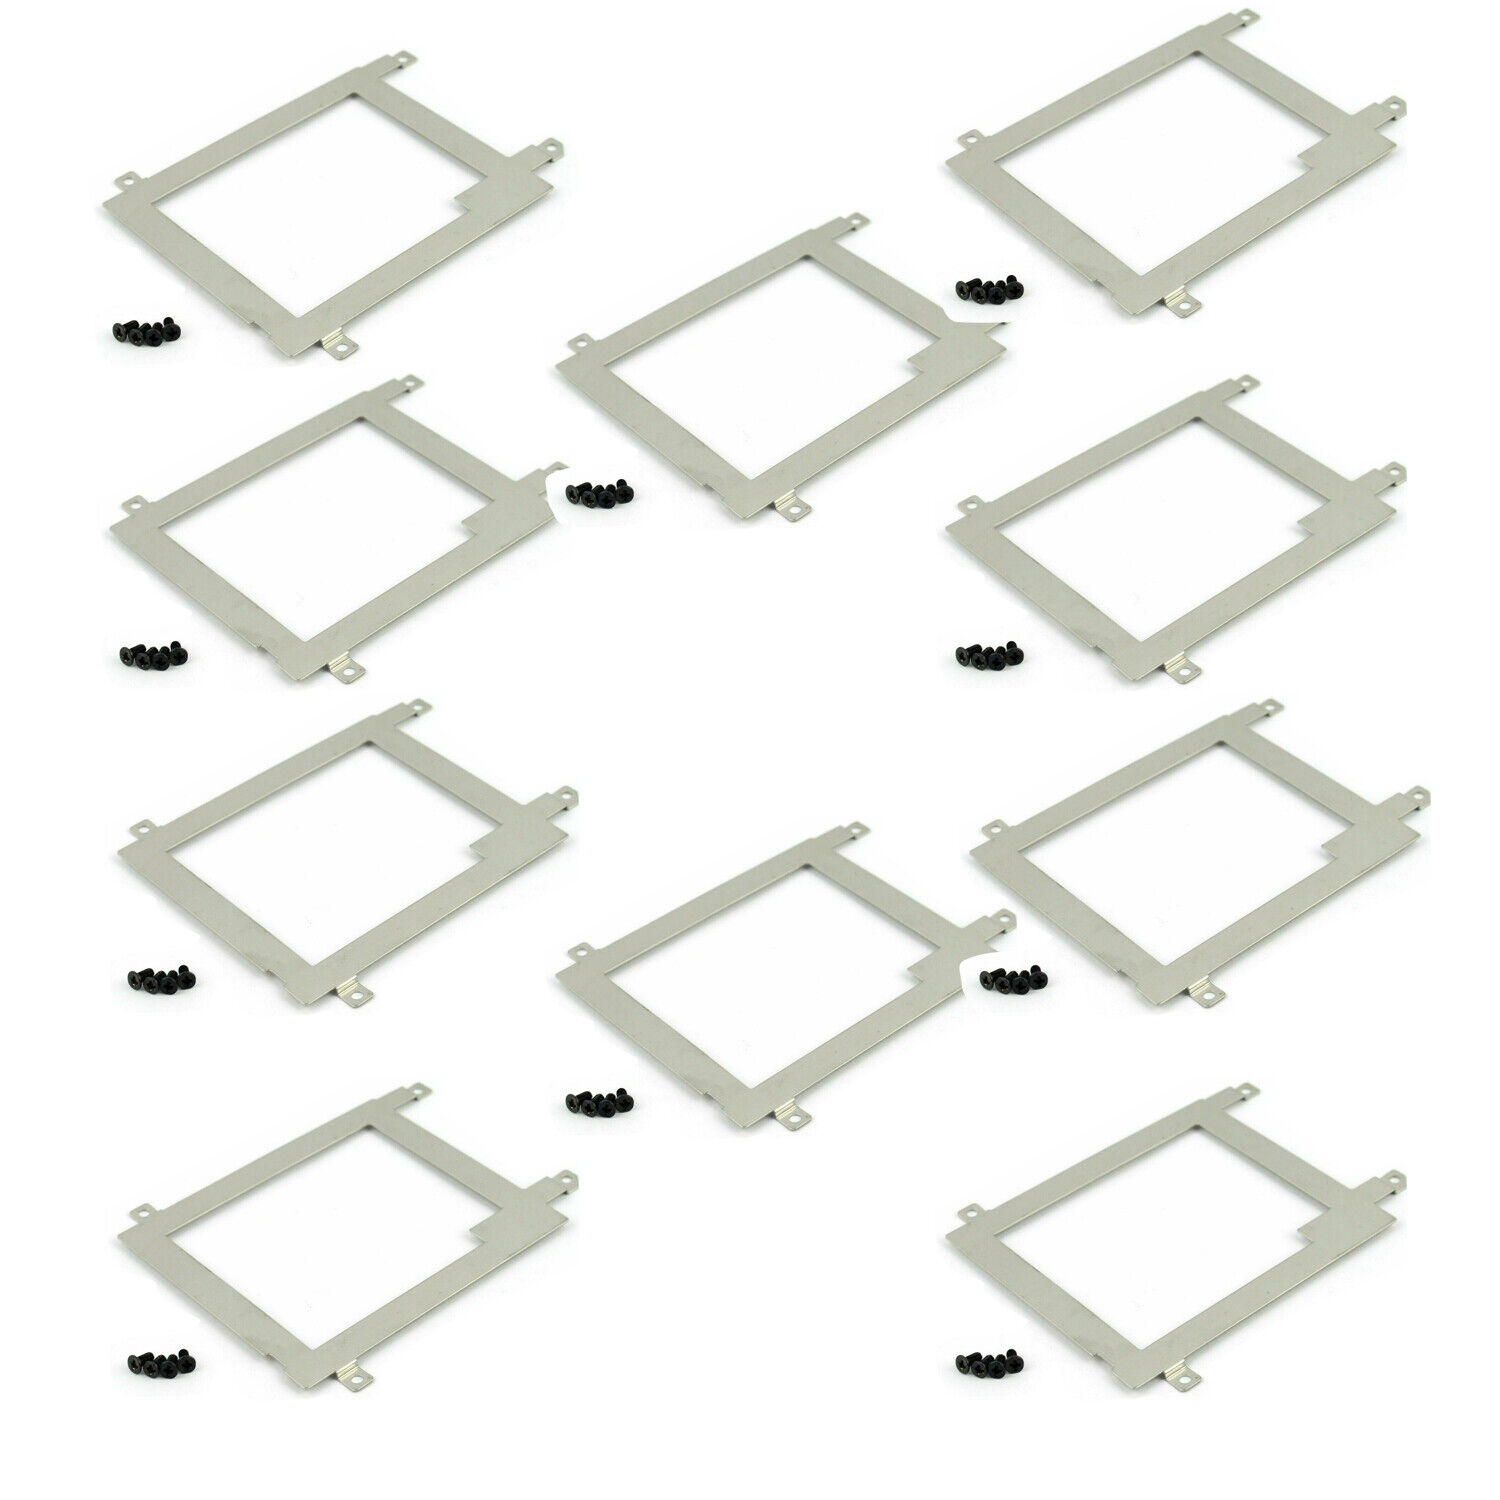 10X SATA Hard Drive HDD 5mm Caddy Frame Bracket for Dell Latitude E7450 E7440 Unbranded/Generic 0WPRM